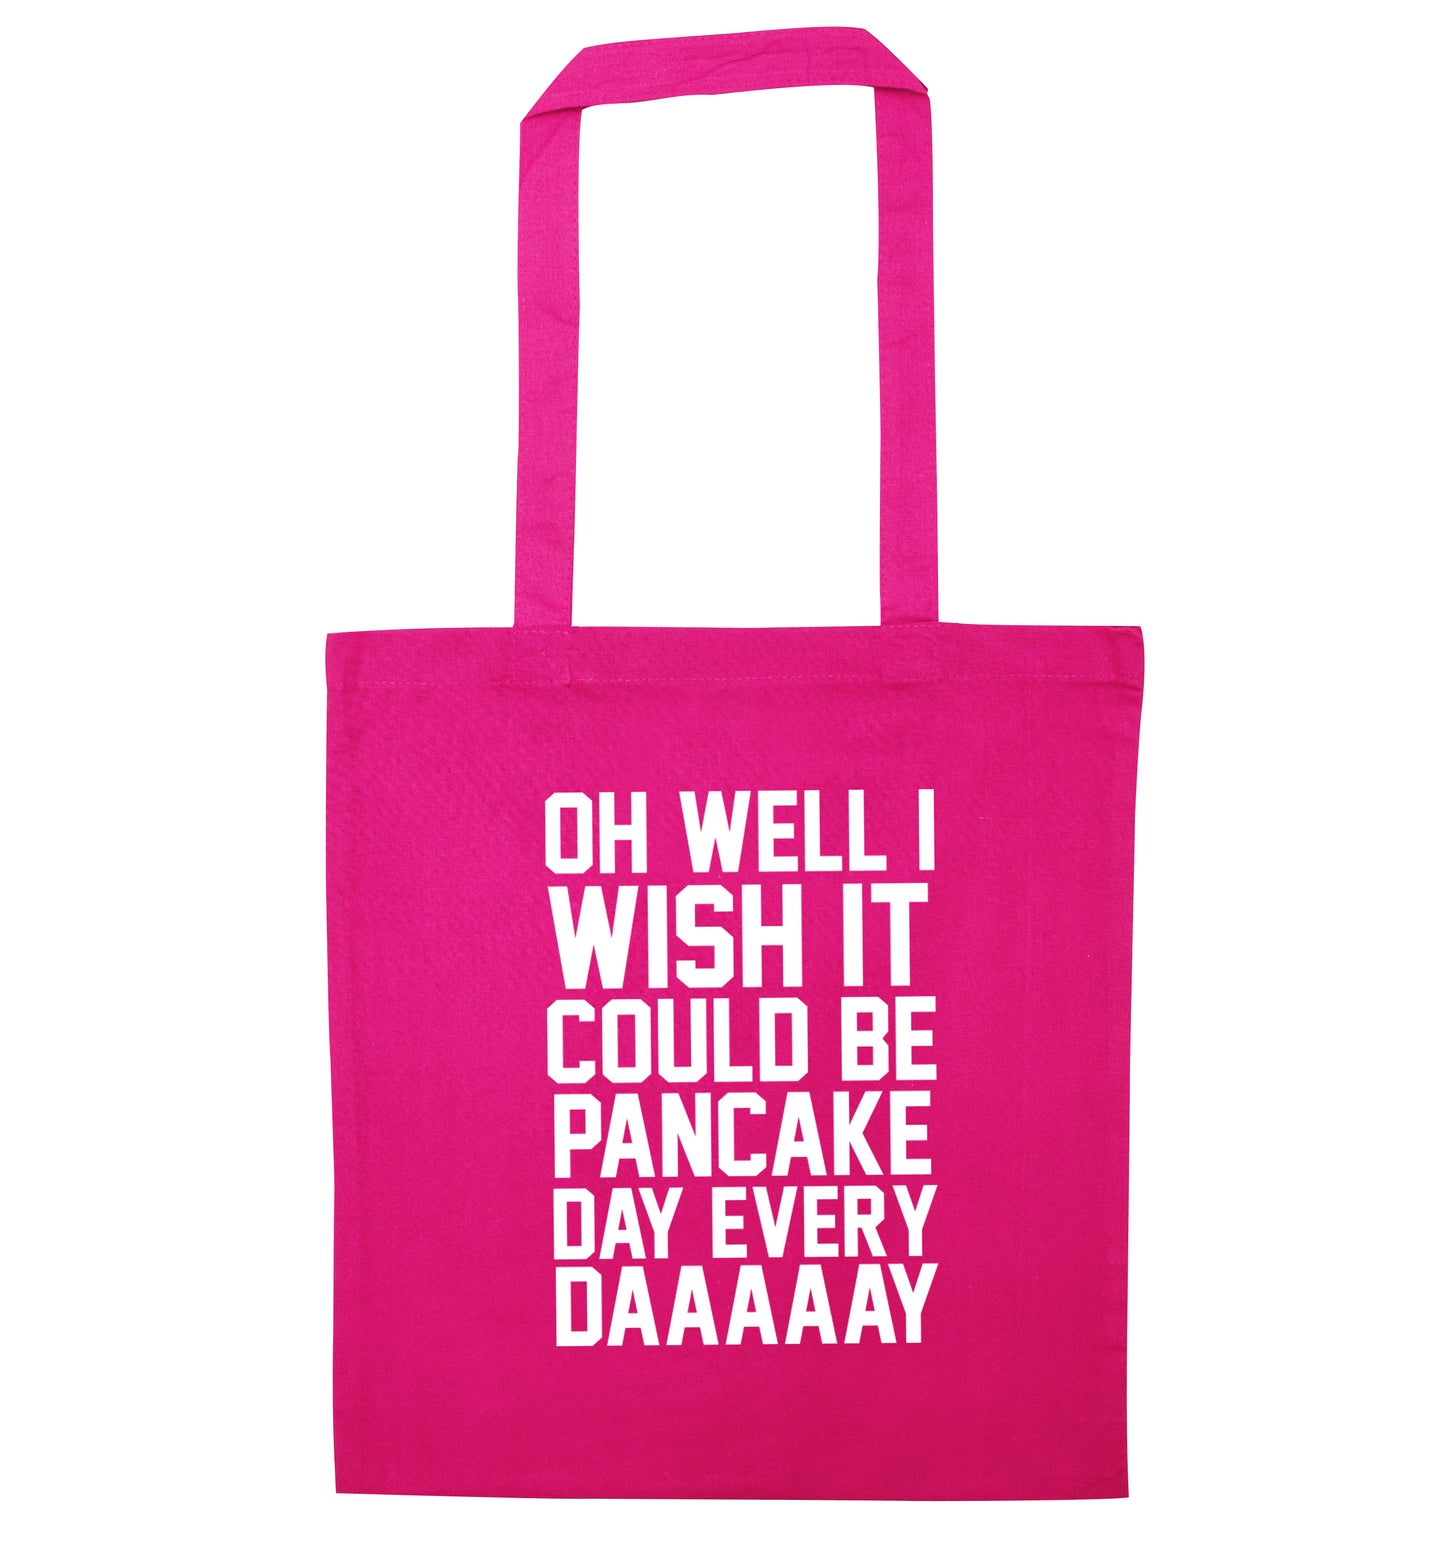 Oh well I wish it could be pancake day everyday pink tote bag